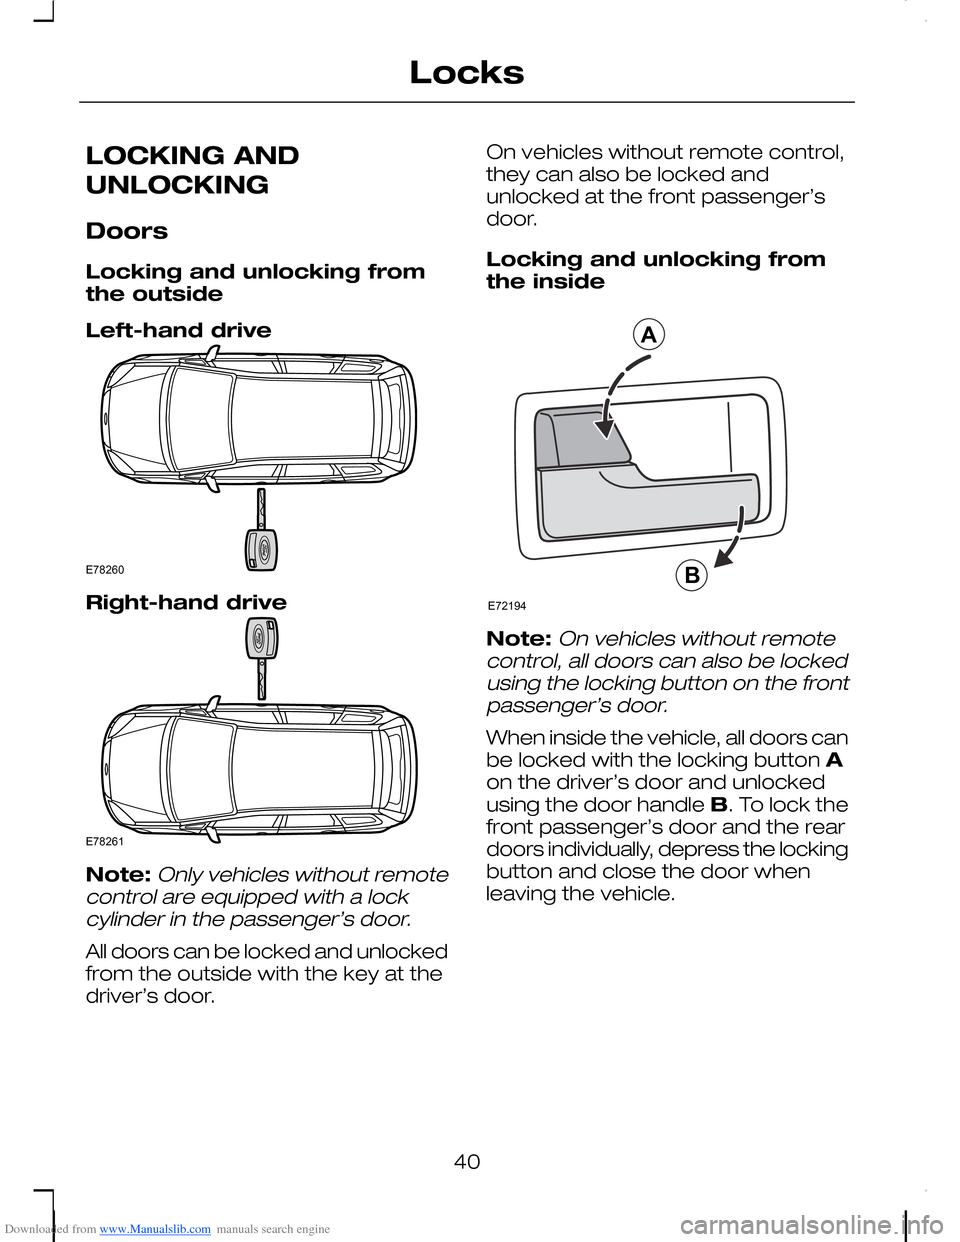 FORD C MAX 2008 1.G Service Manual Downloaded from www.Manualslib.com manuals search engine LOCKING AND
UNLOCKING
Doors
Locking and unlocking fromthe outside
Left-hand drive
Right-hand drive
Note:Only vehicles without remotecontrol are